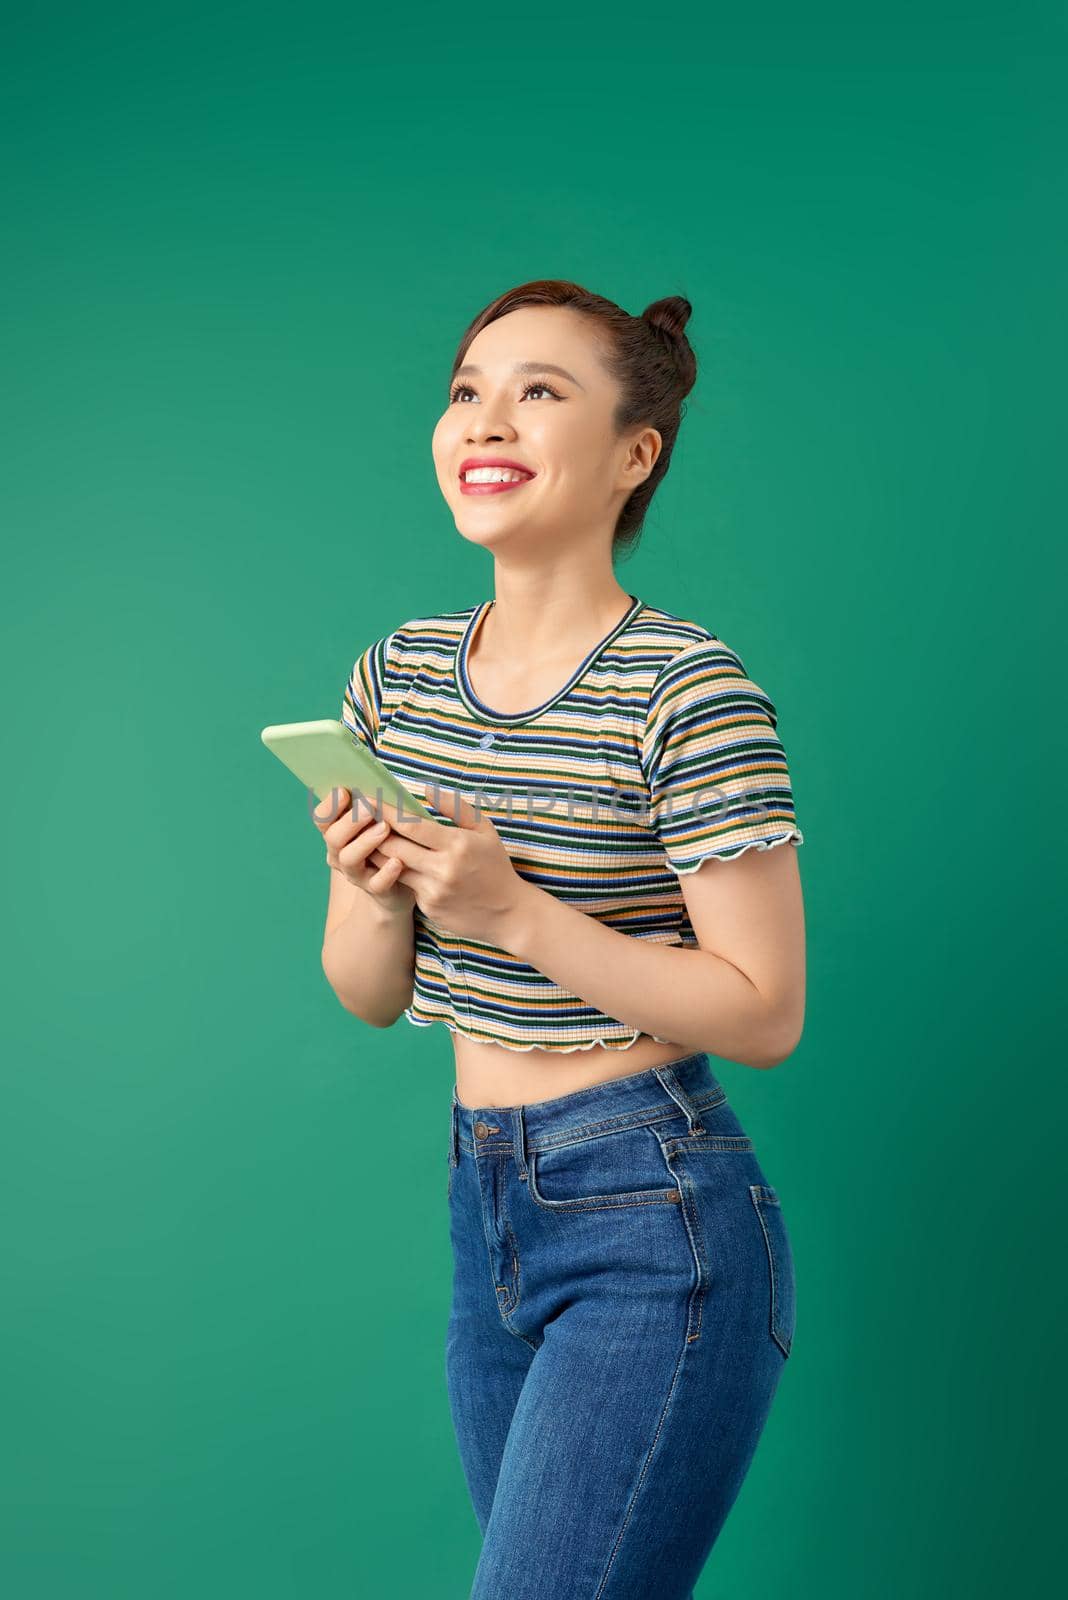 Pretty young Asian woman using smartphone in casual clothign over colorful green background